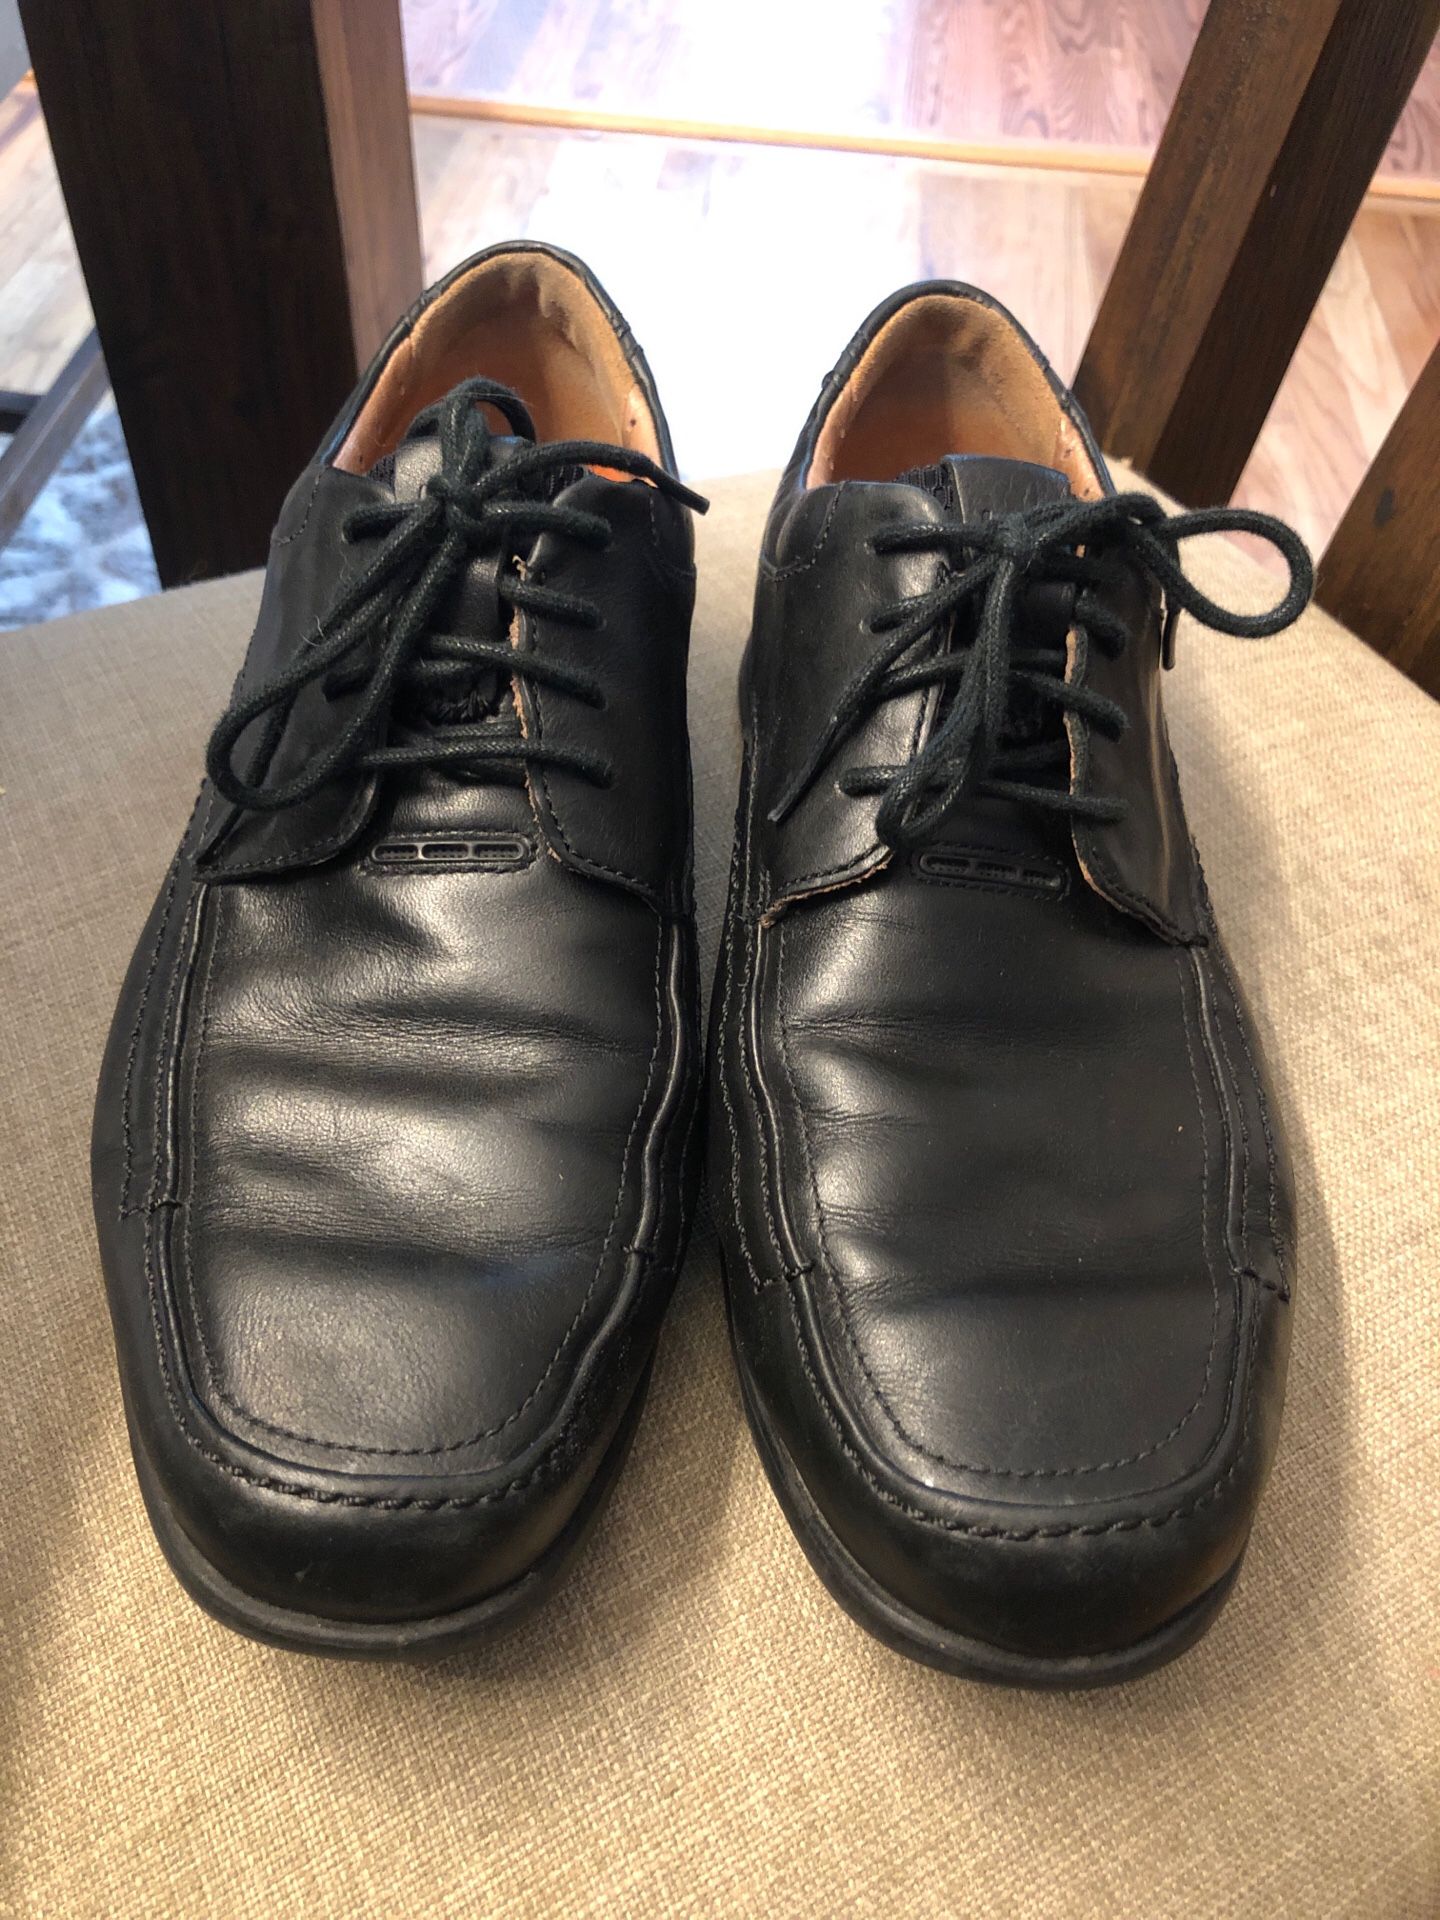 Clarks Unstructured Oxfords Men's Black Leather Lace-Up Excellent Size 8 W for Sale MA - OfferUp